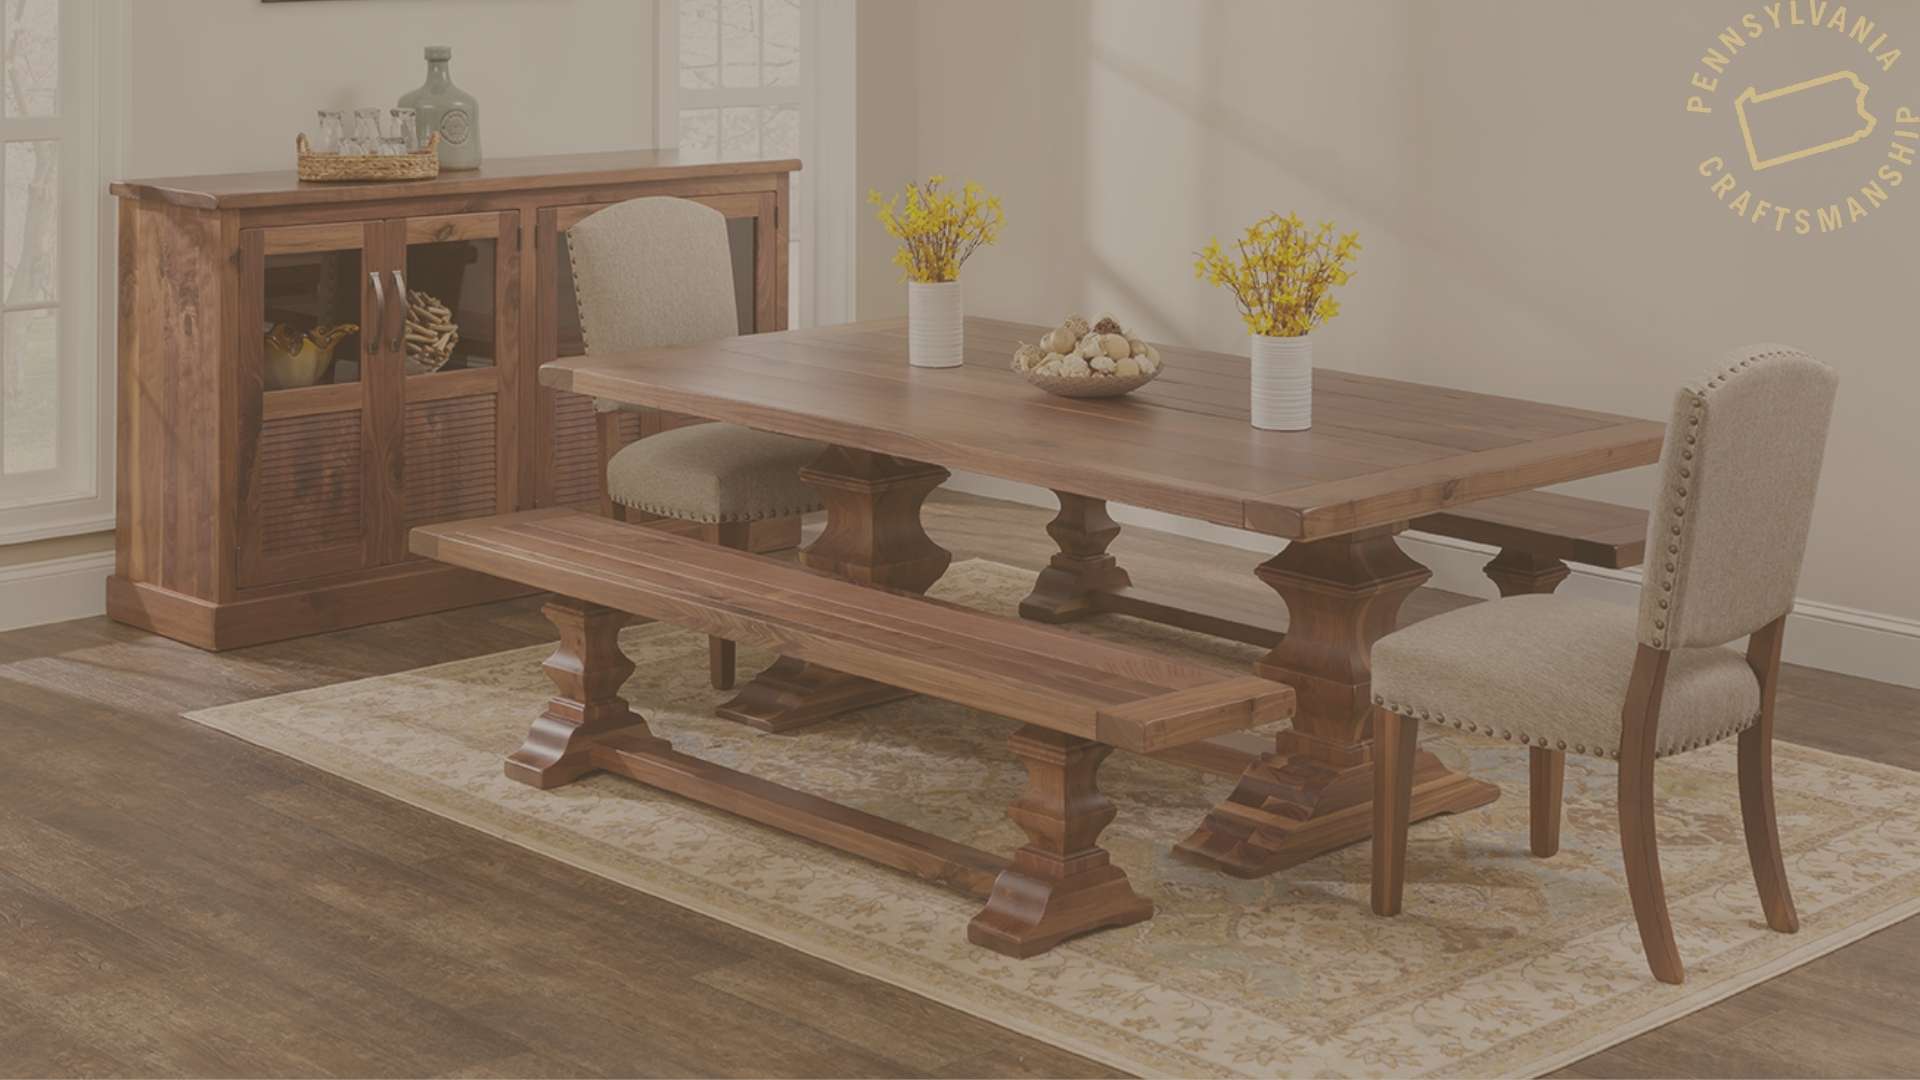 Who is Lancaster Legacy Amish Furniture? - snyders.furniture